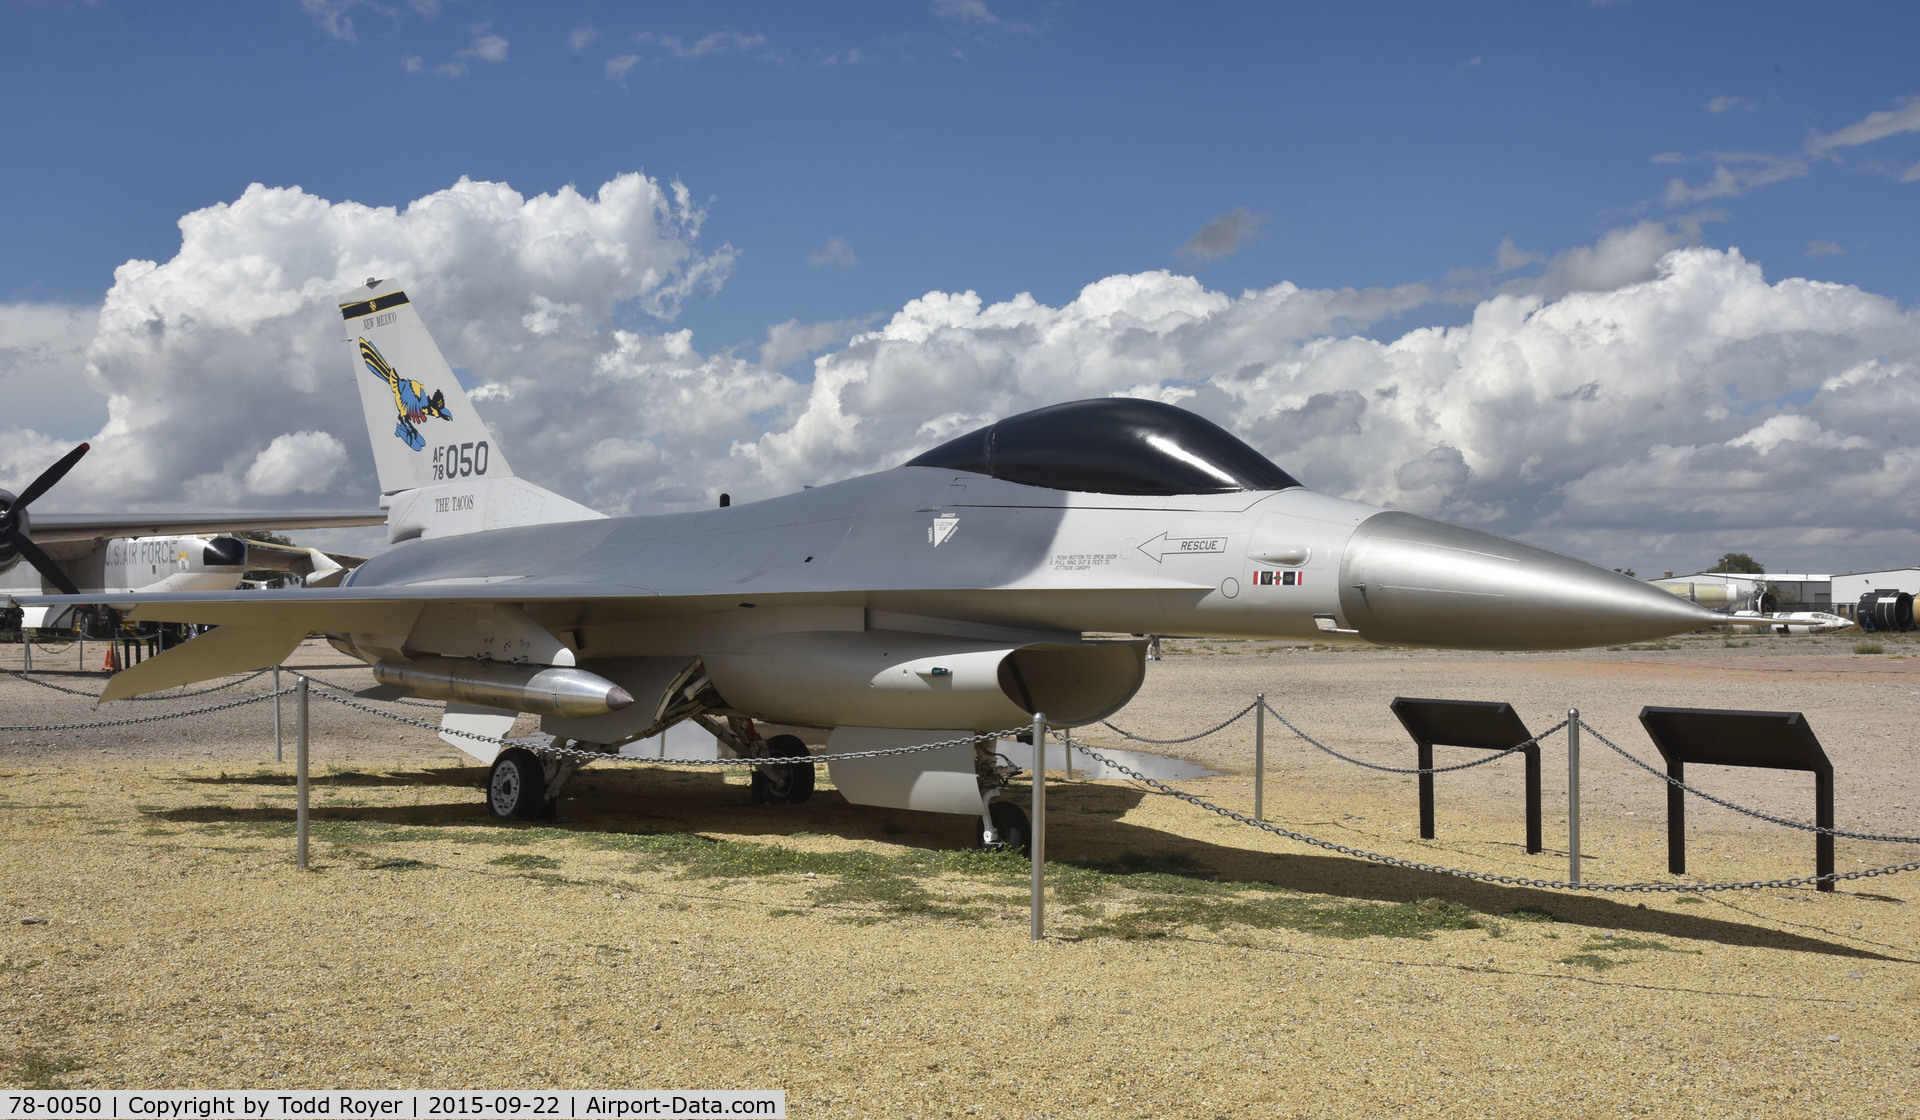 78-0050, 1978 General Dynamics F-16A Fighting Falcon C/N 61-46, On display at the National Museum of Nuclear Science and History